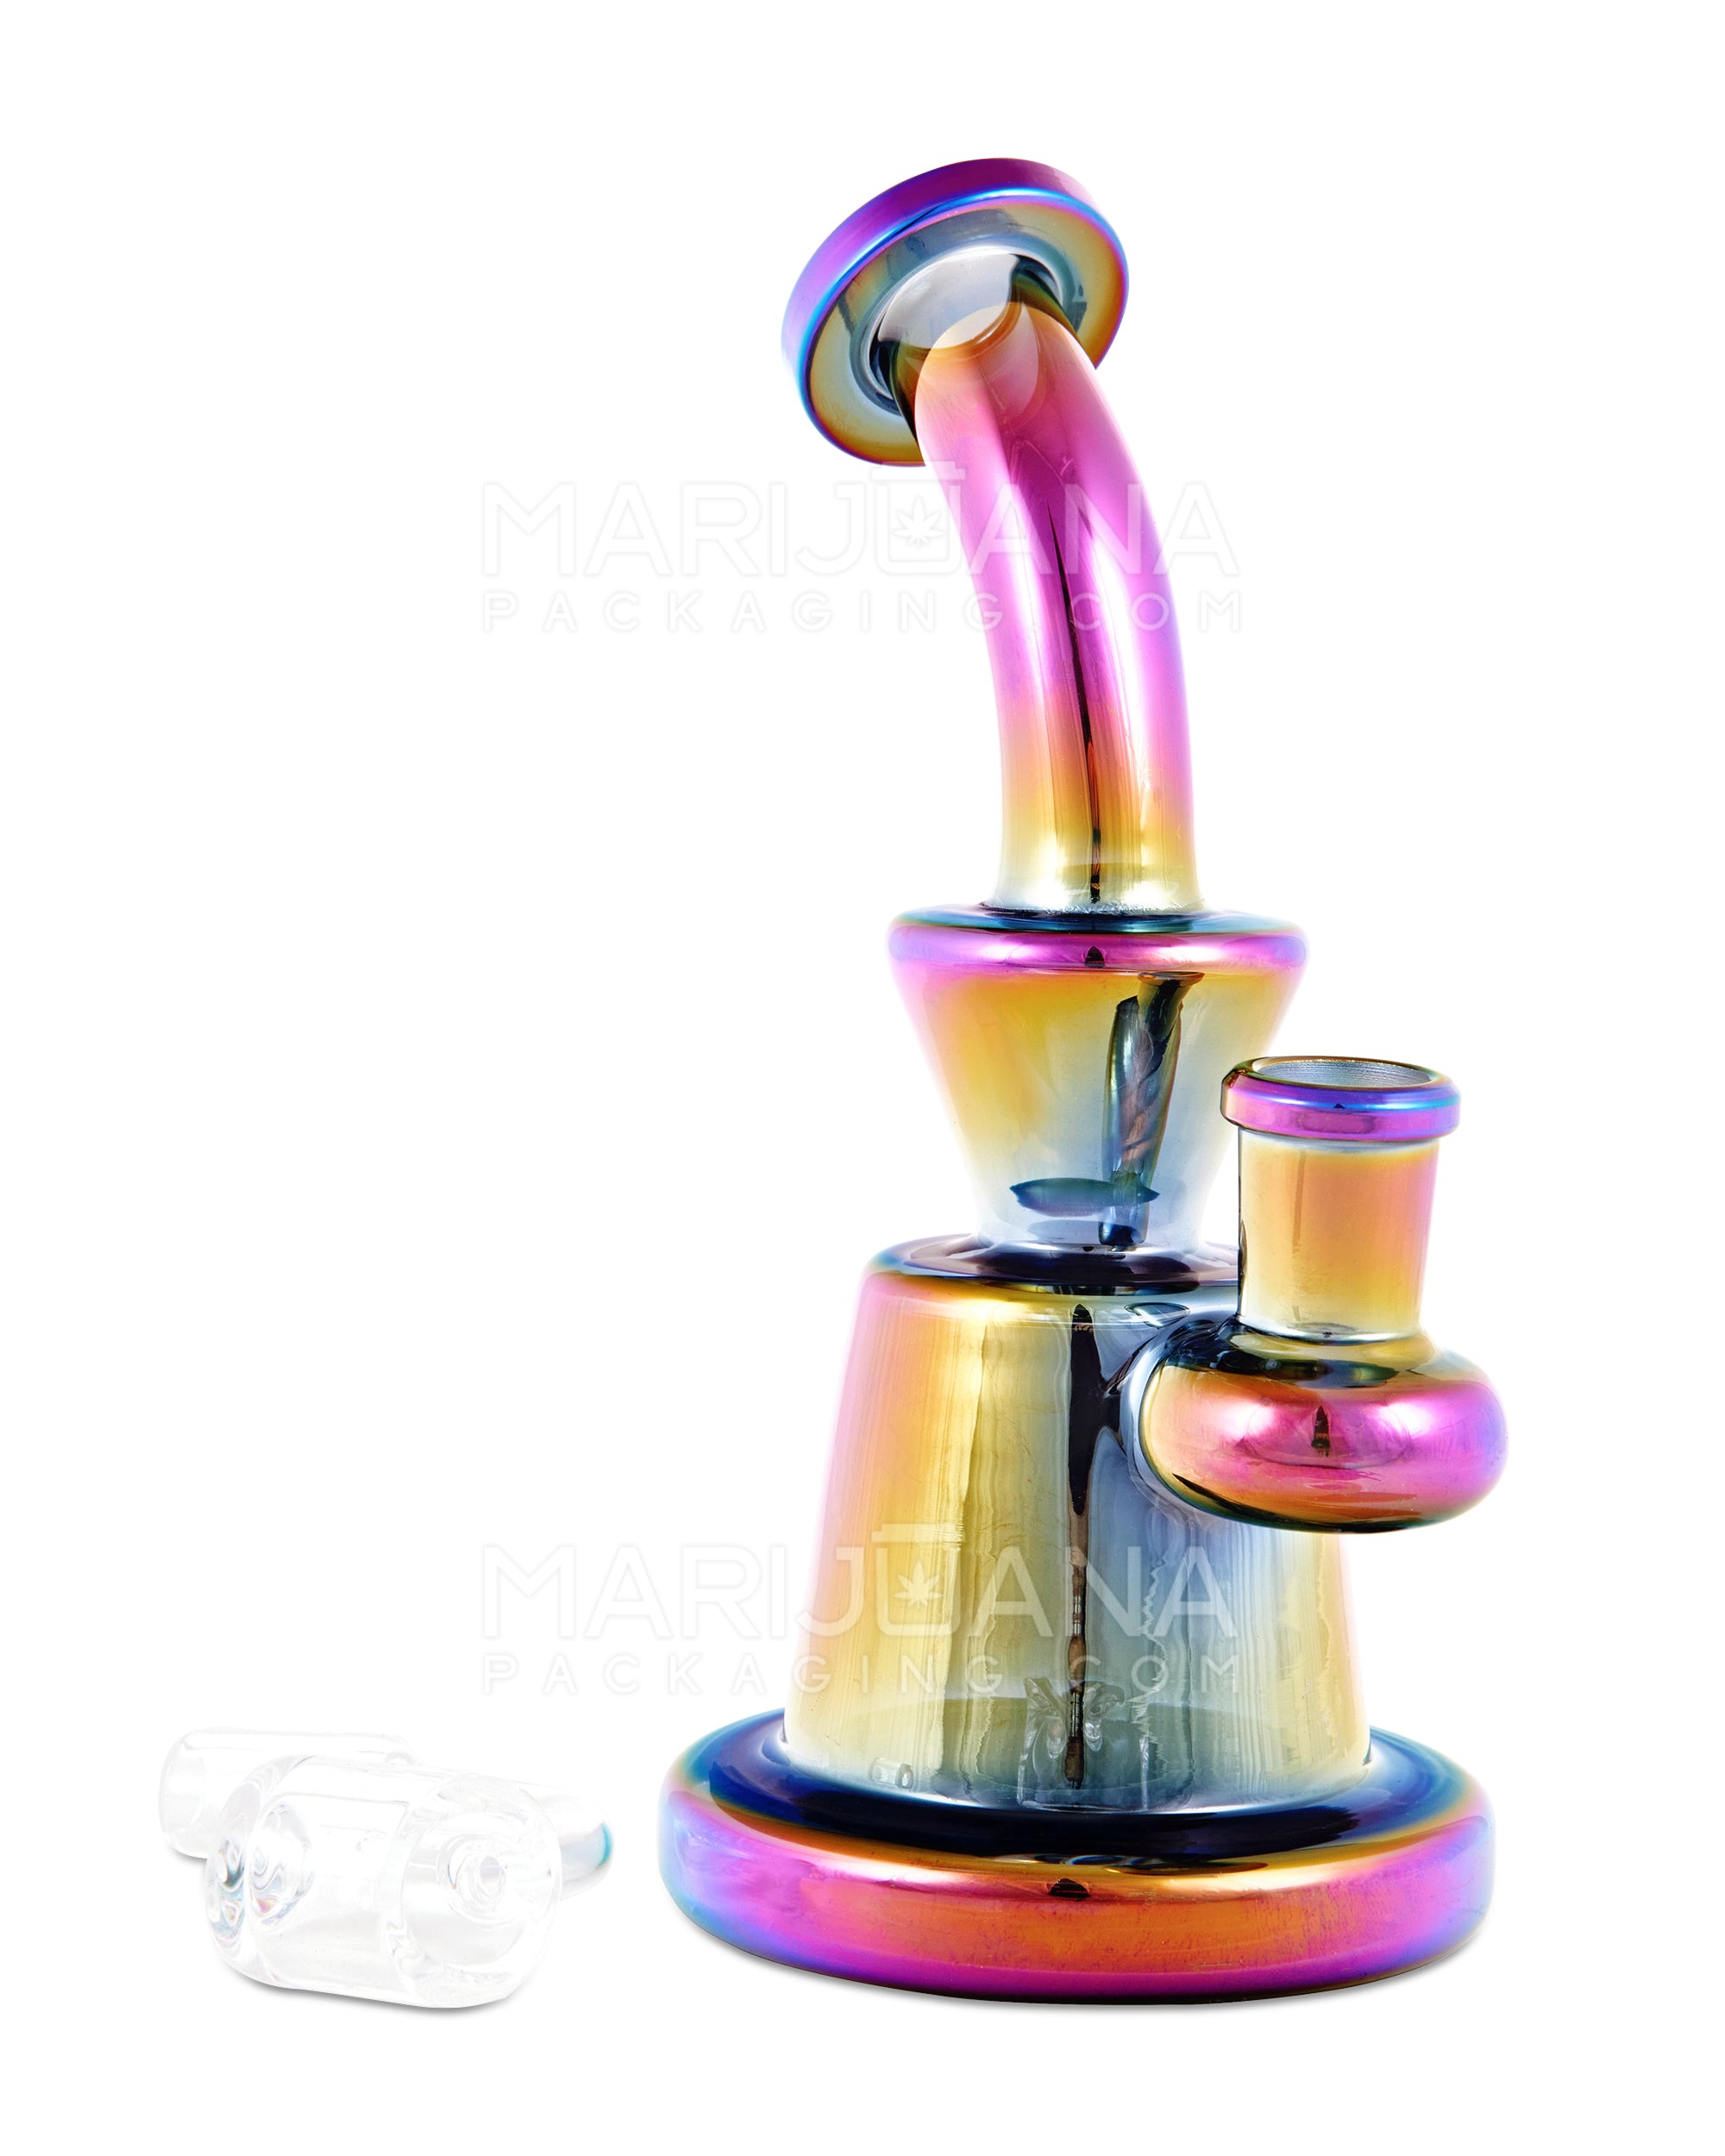 Bent Neck Iridescent Glass Baker Dab Rig | 6in Tall - 14mm Banger - Rainbow - 2